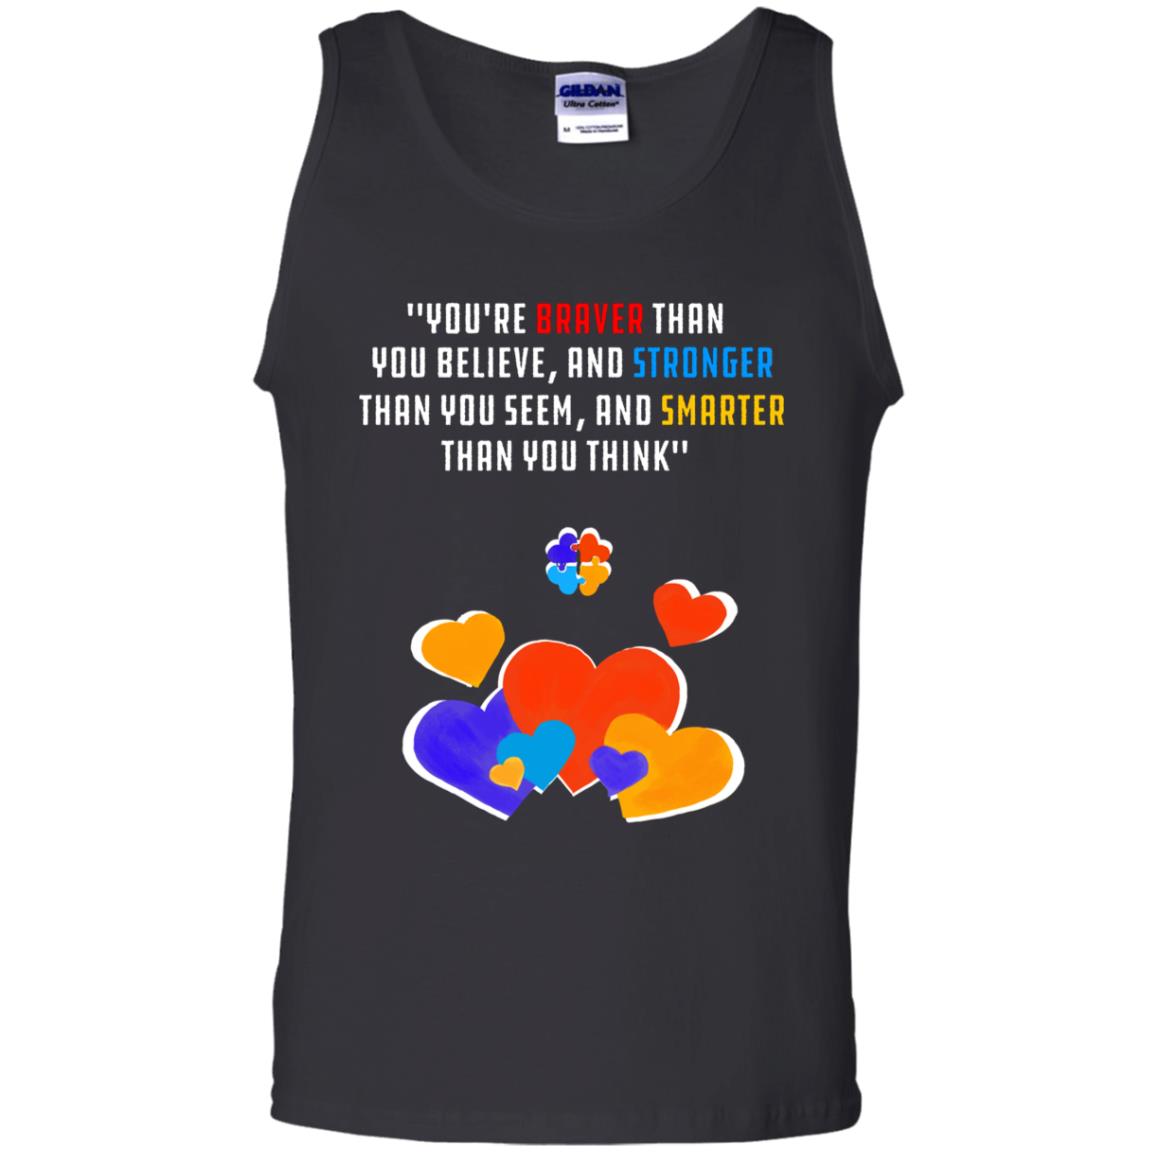 You Are Braver Than You Believe And Stronger Than You Seem And Smarter Than You Think Autism ShirtG220 Gildan 100% Cotton Tank Top